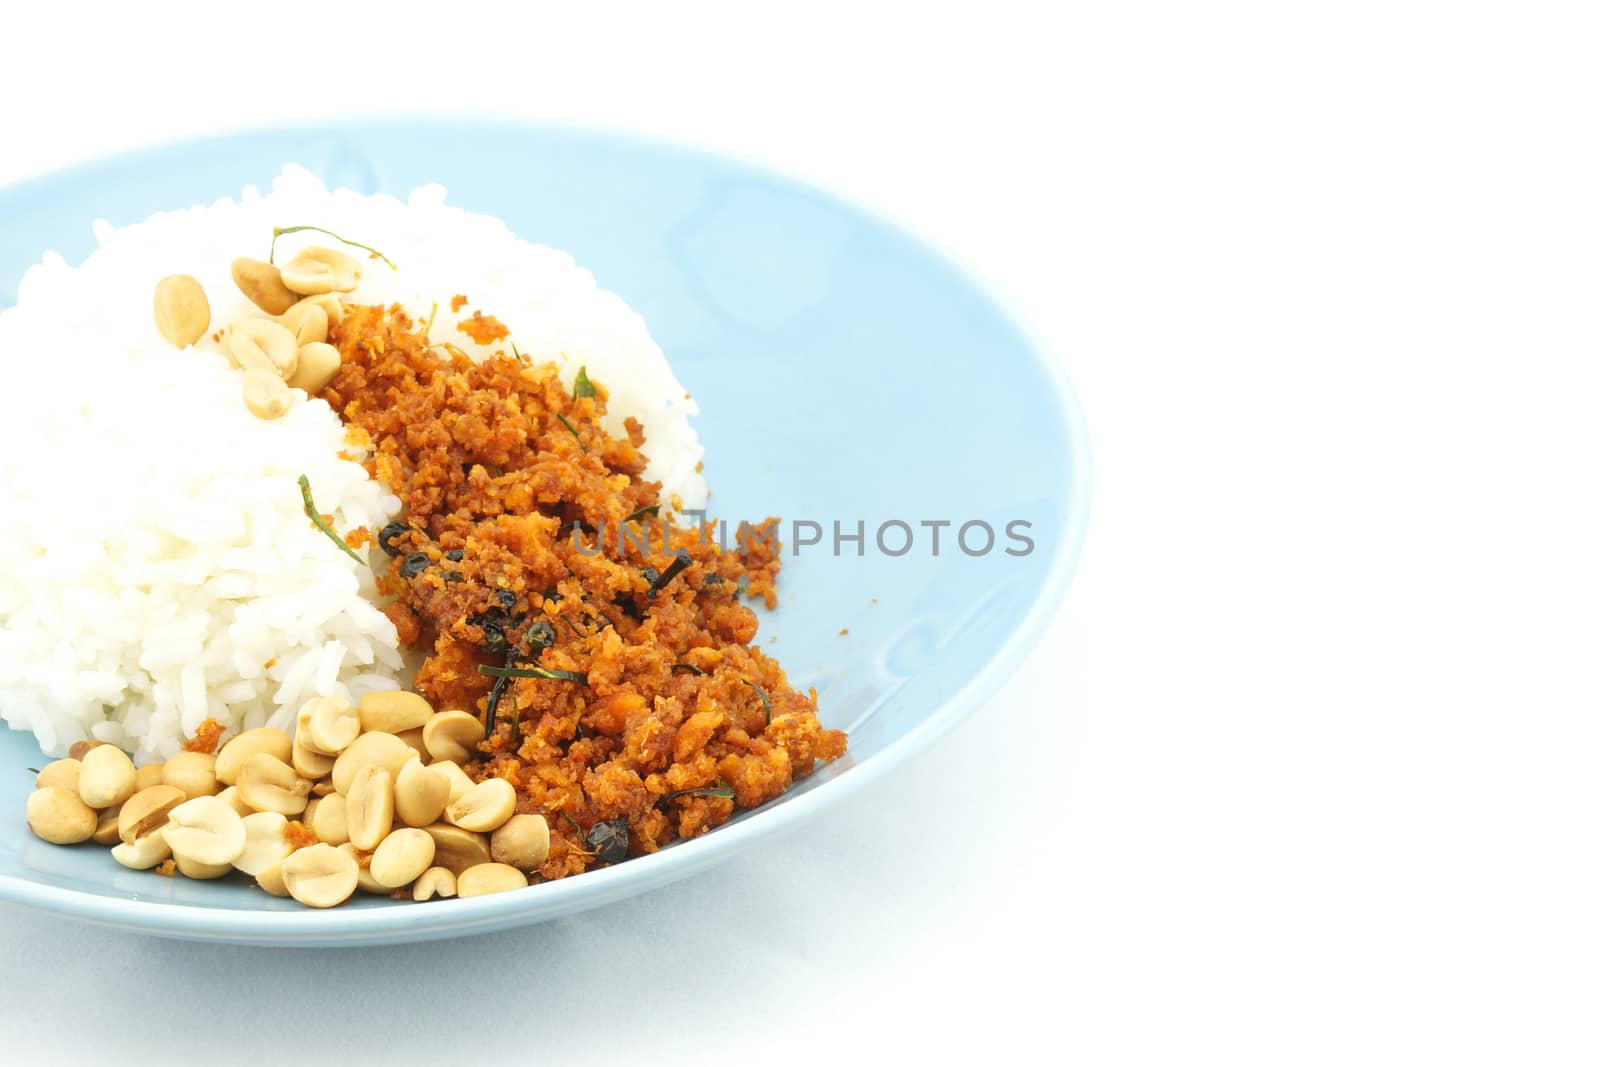 Rice and fried tofu with black pepper, peanuts look like crispy catfish vegetarian on dish with white background.